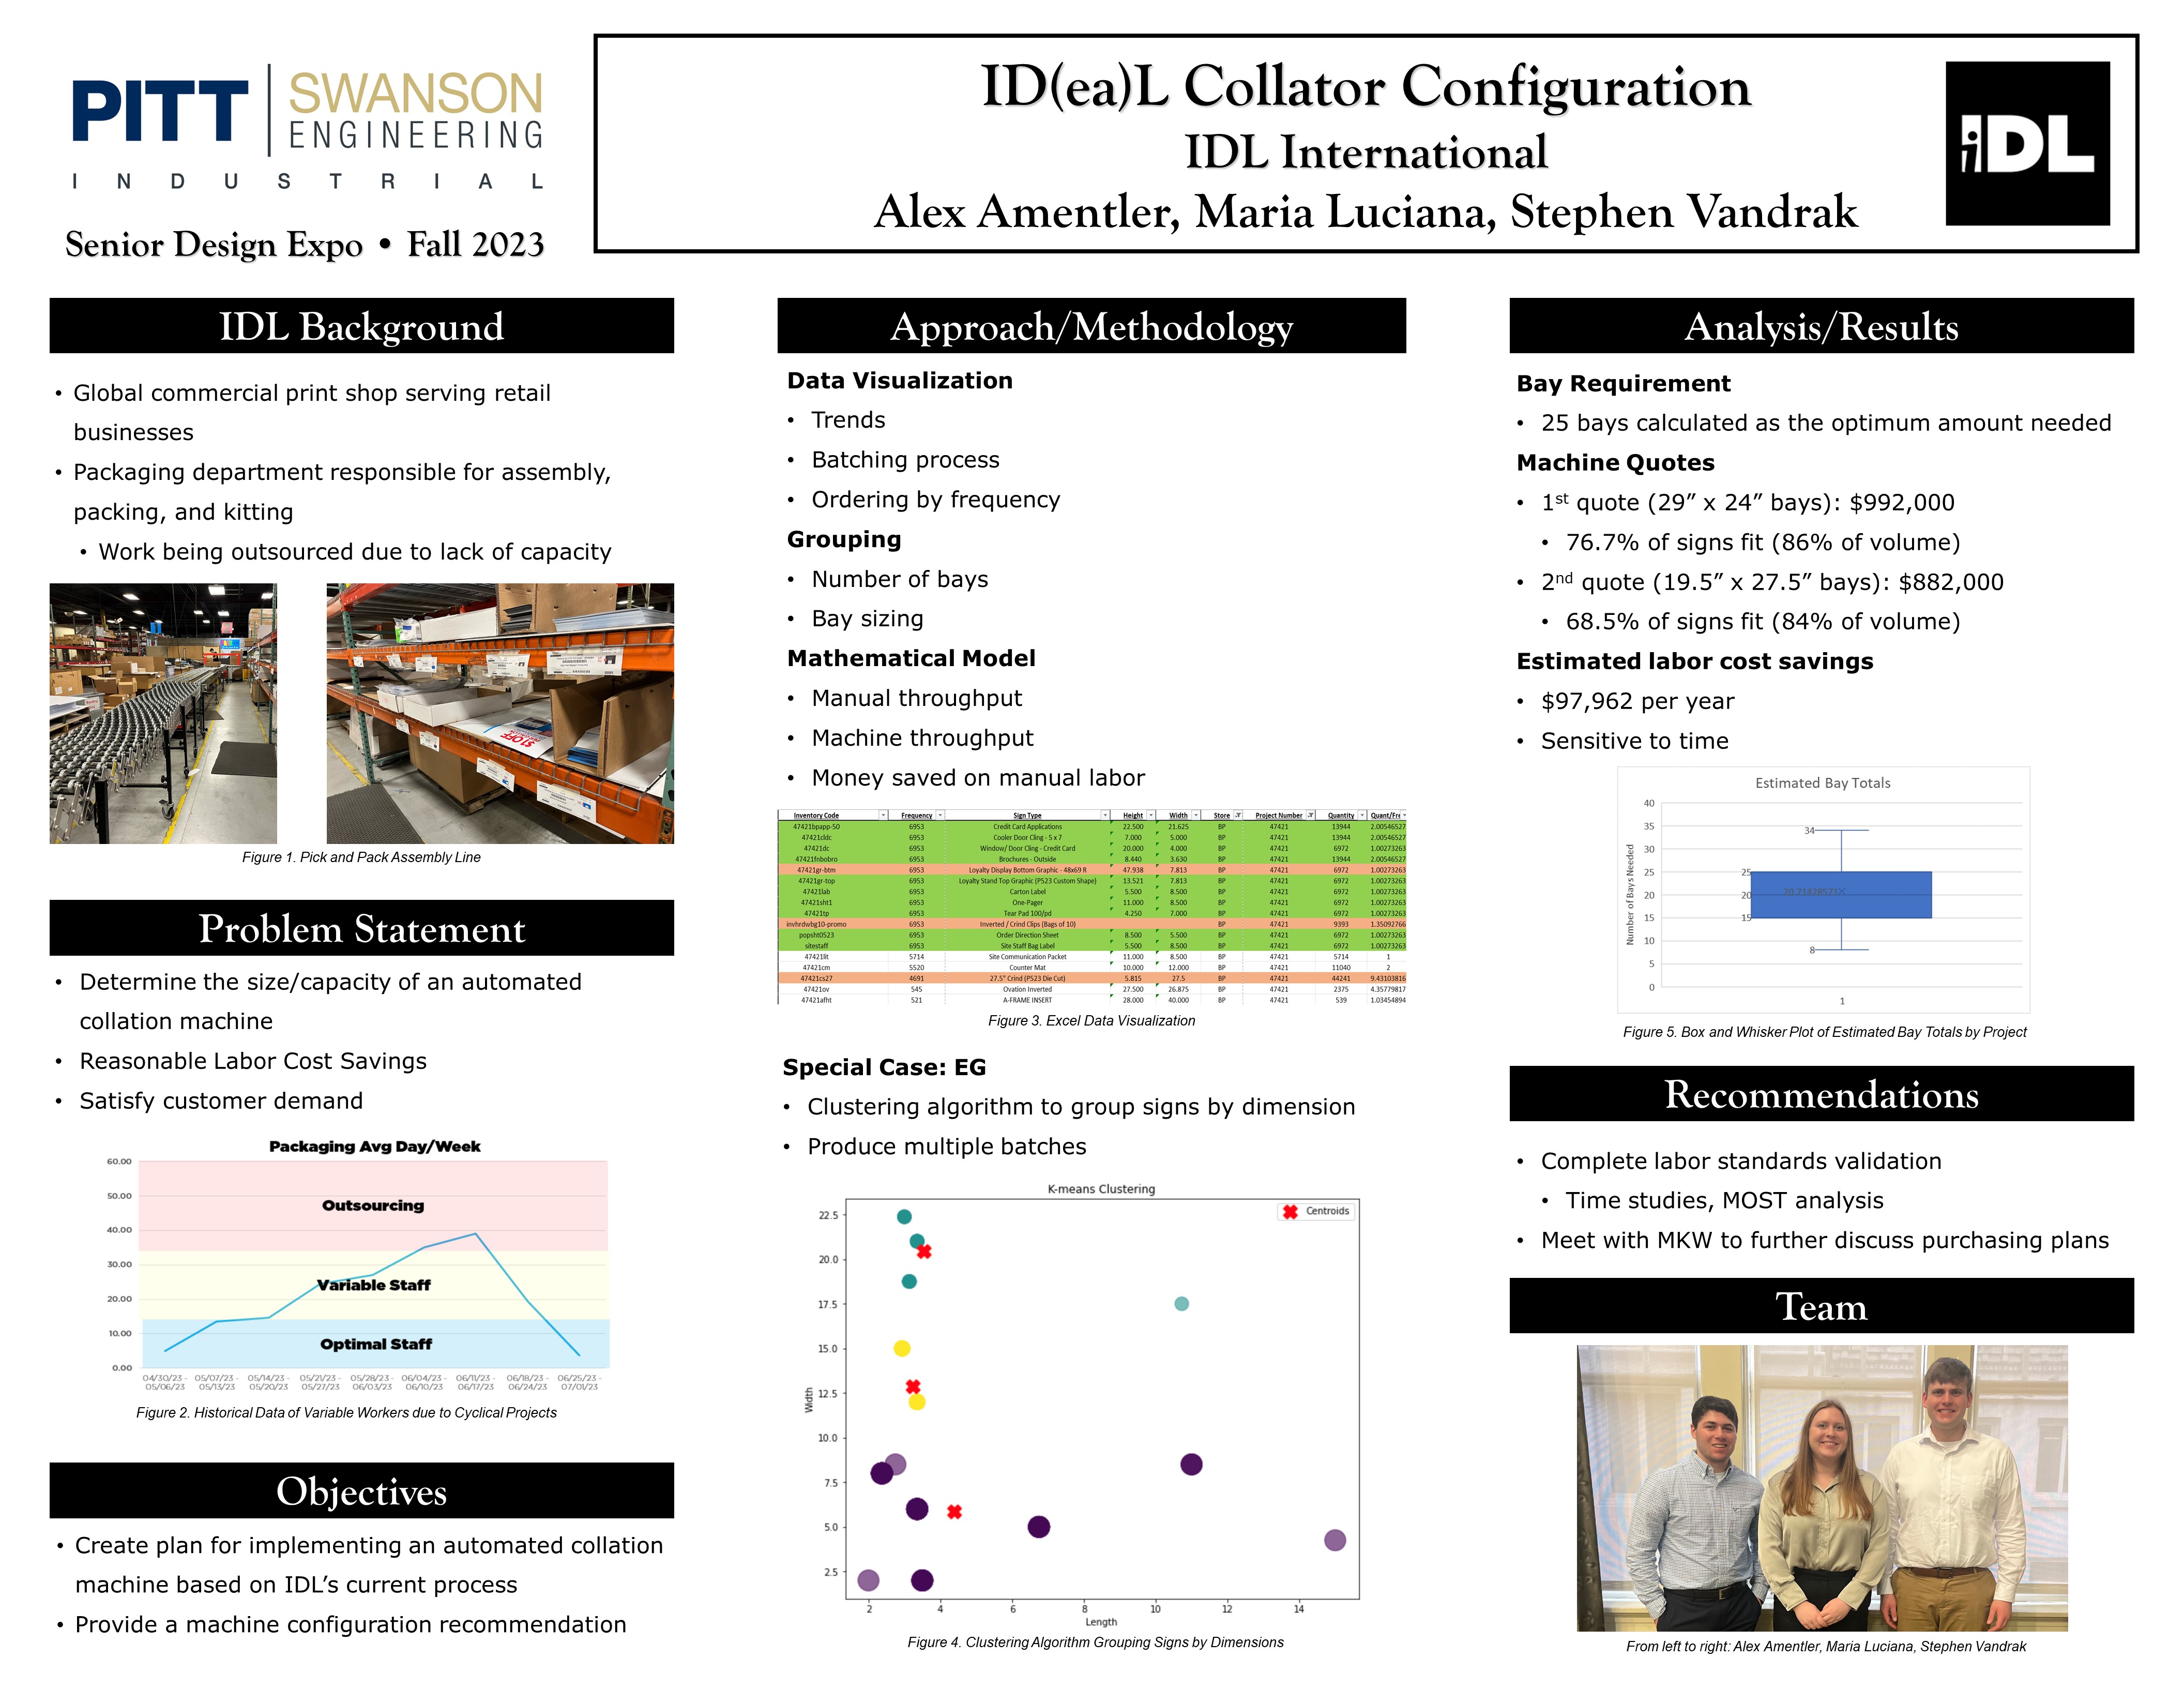 ID(ea)L Collator Configuration, IDL International research poster with visuals for the project summary